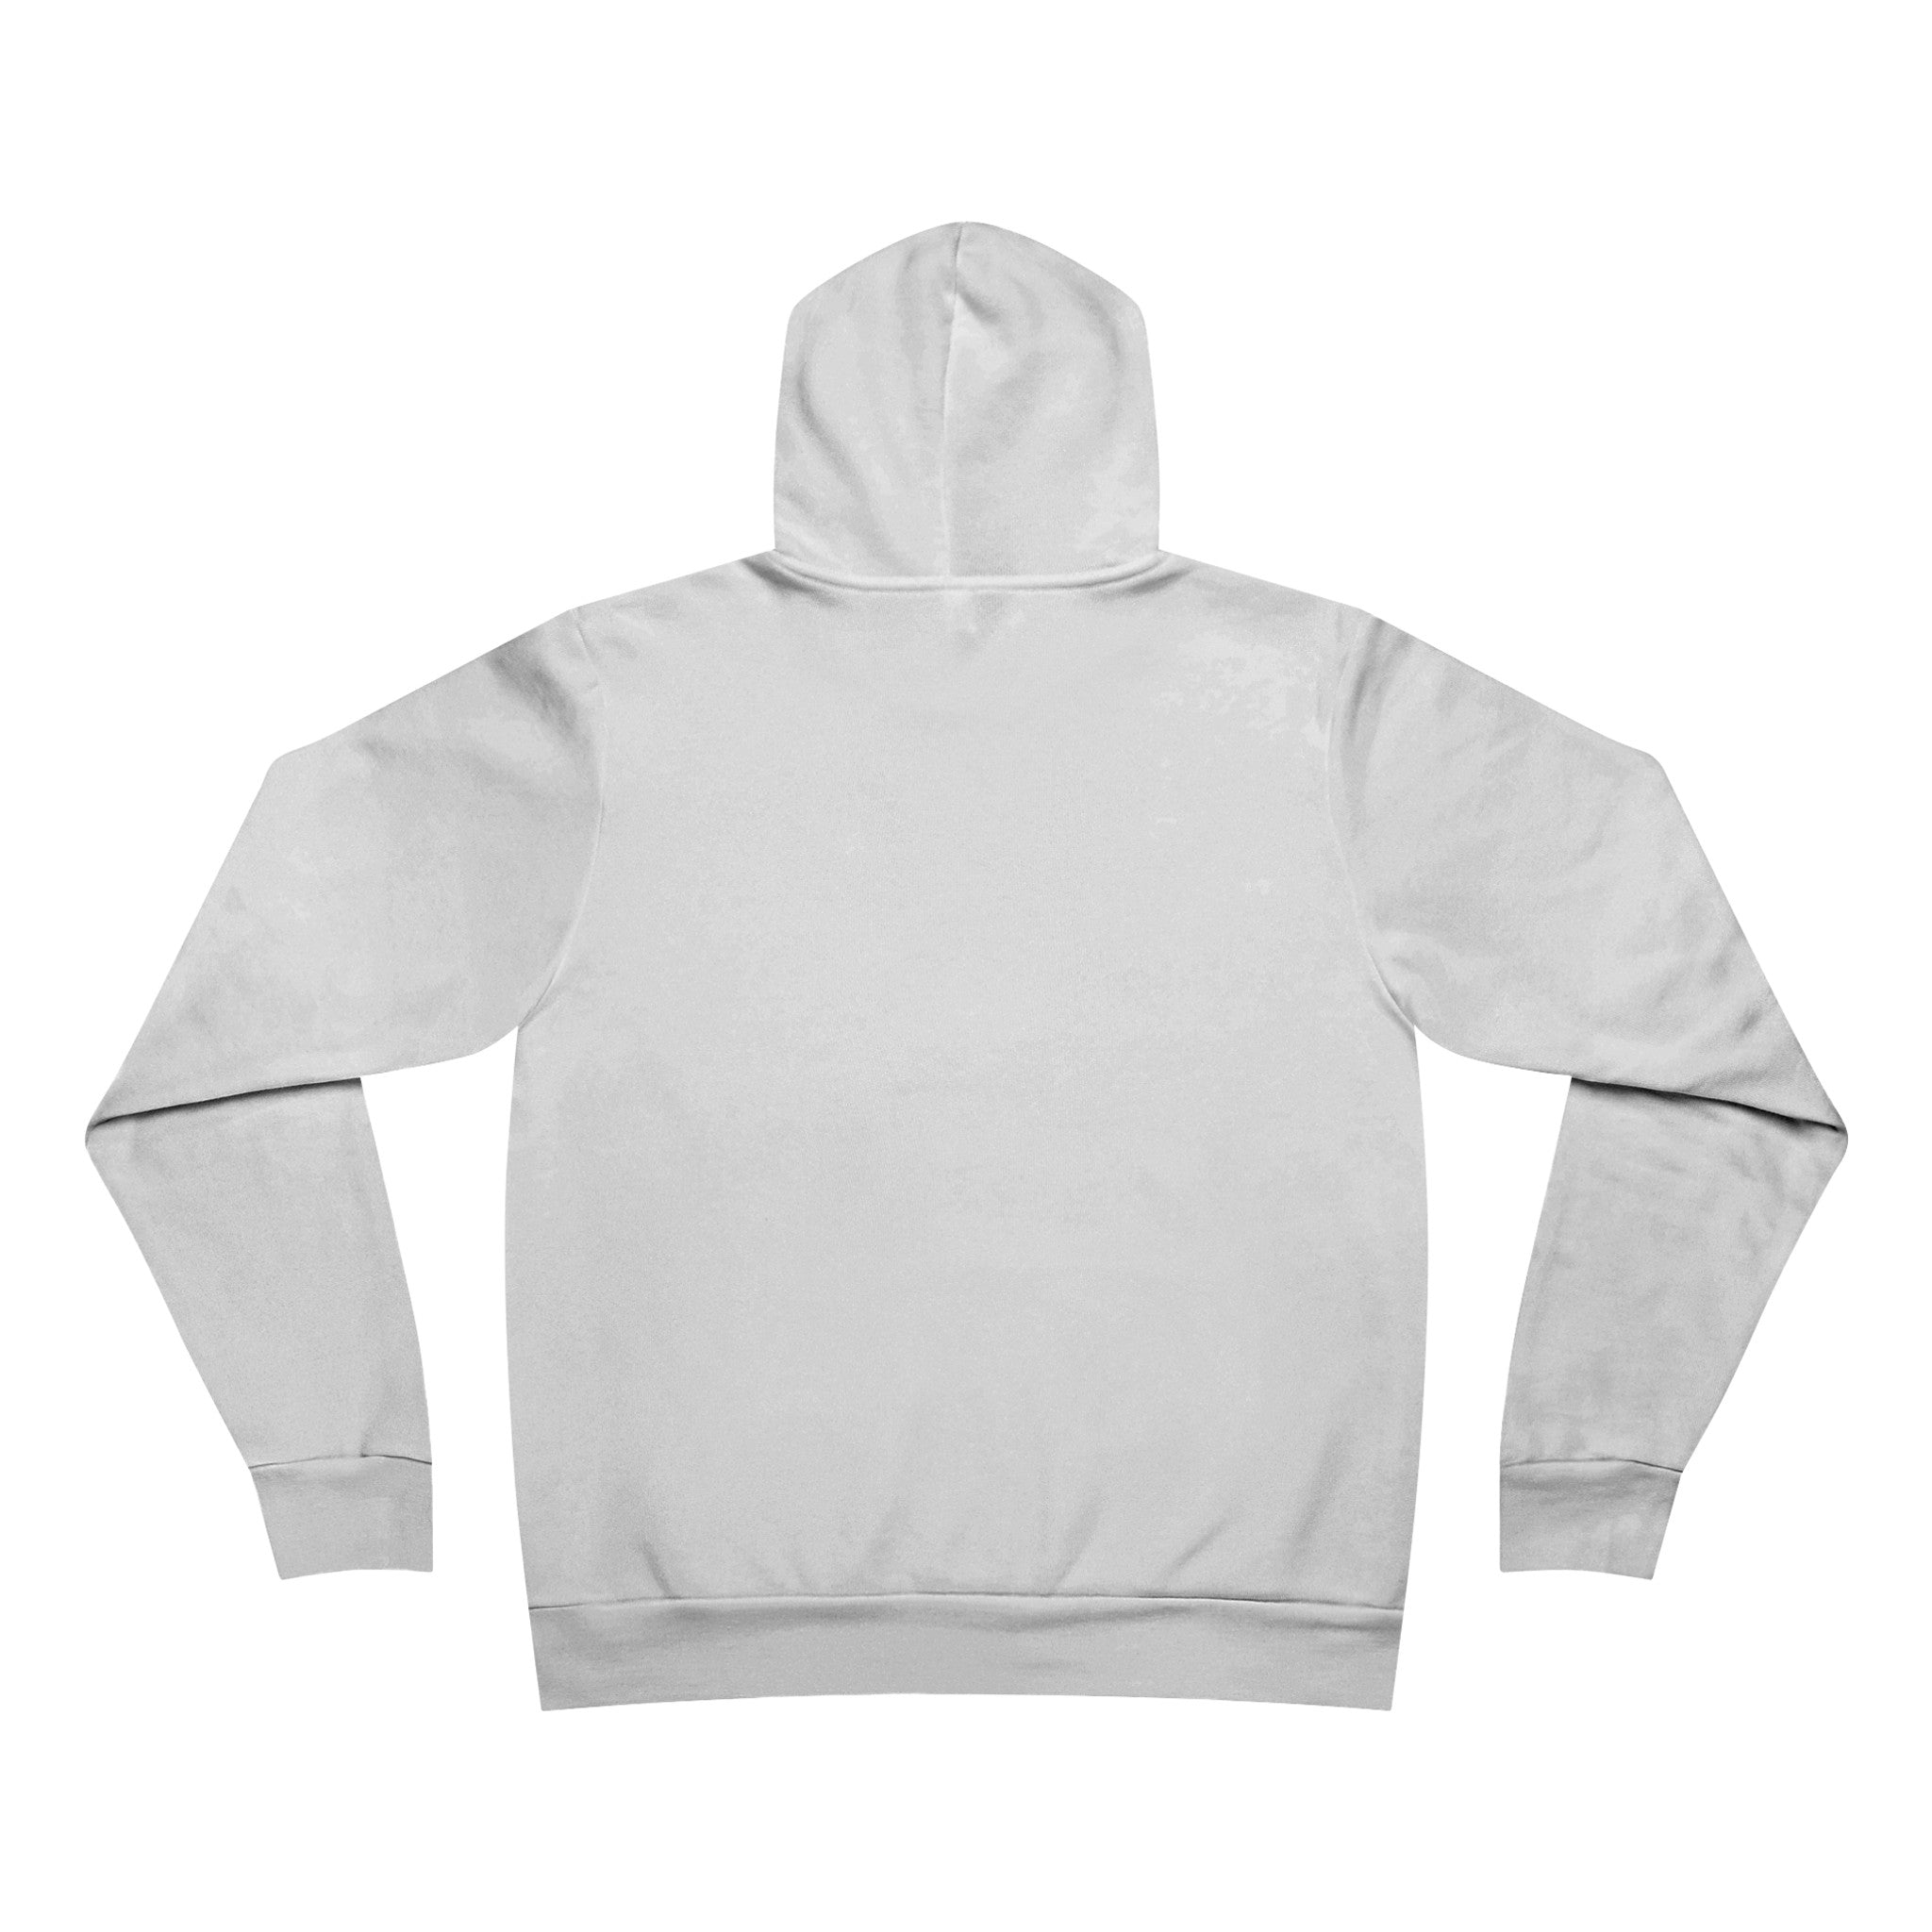 Better Things are Coming - Pullover Hoodie